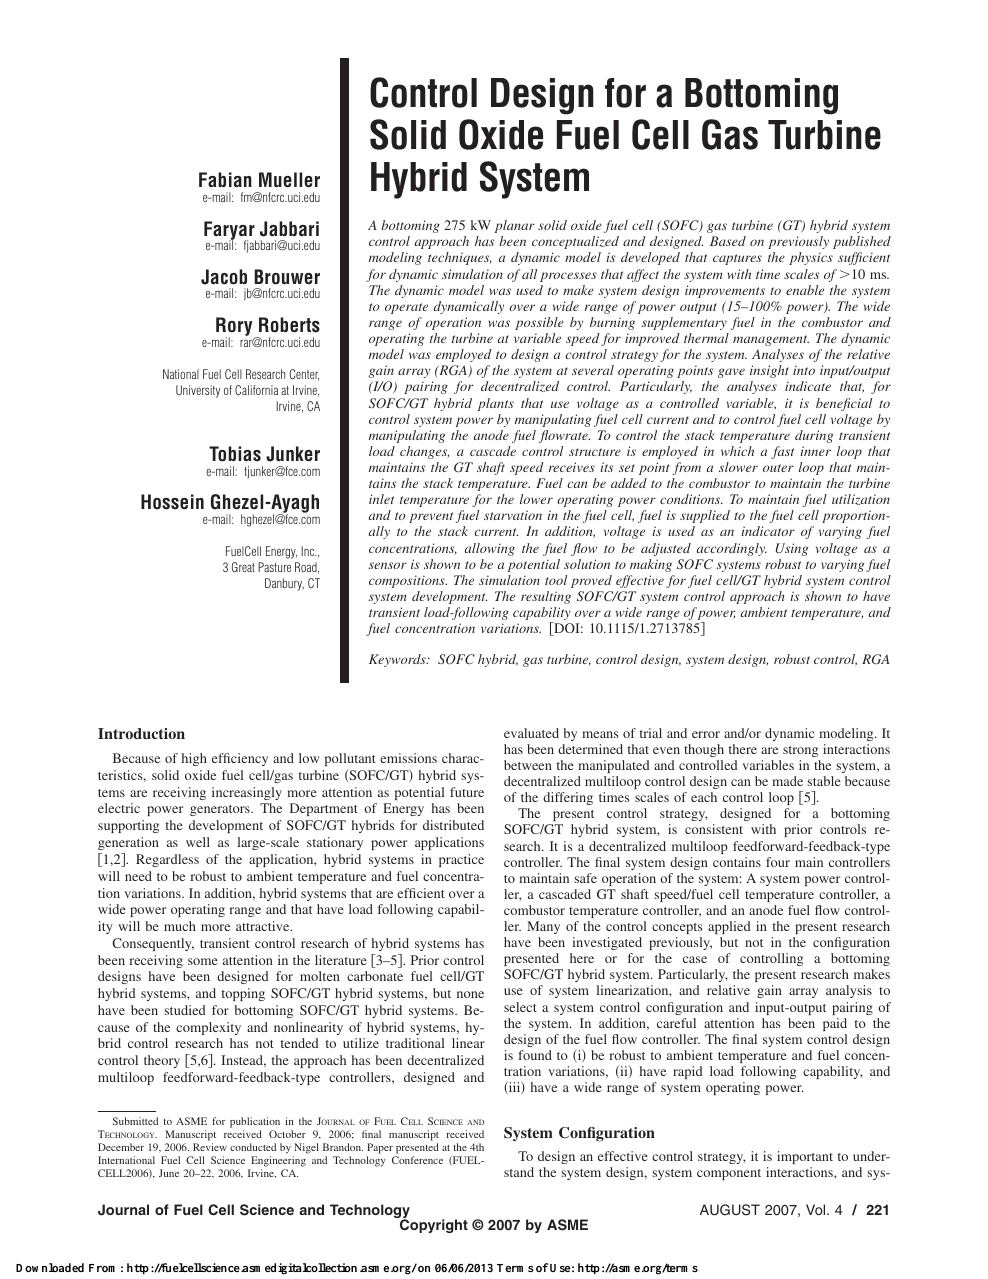 Control Design For A Bottoming Solid Oxide Fuel Cell Gas Turbine Hybrid System Topic Of Research Paper In Electrical Engineering Electronic Engineering Information Engineering Download Scholarly Article Pdf And Read For